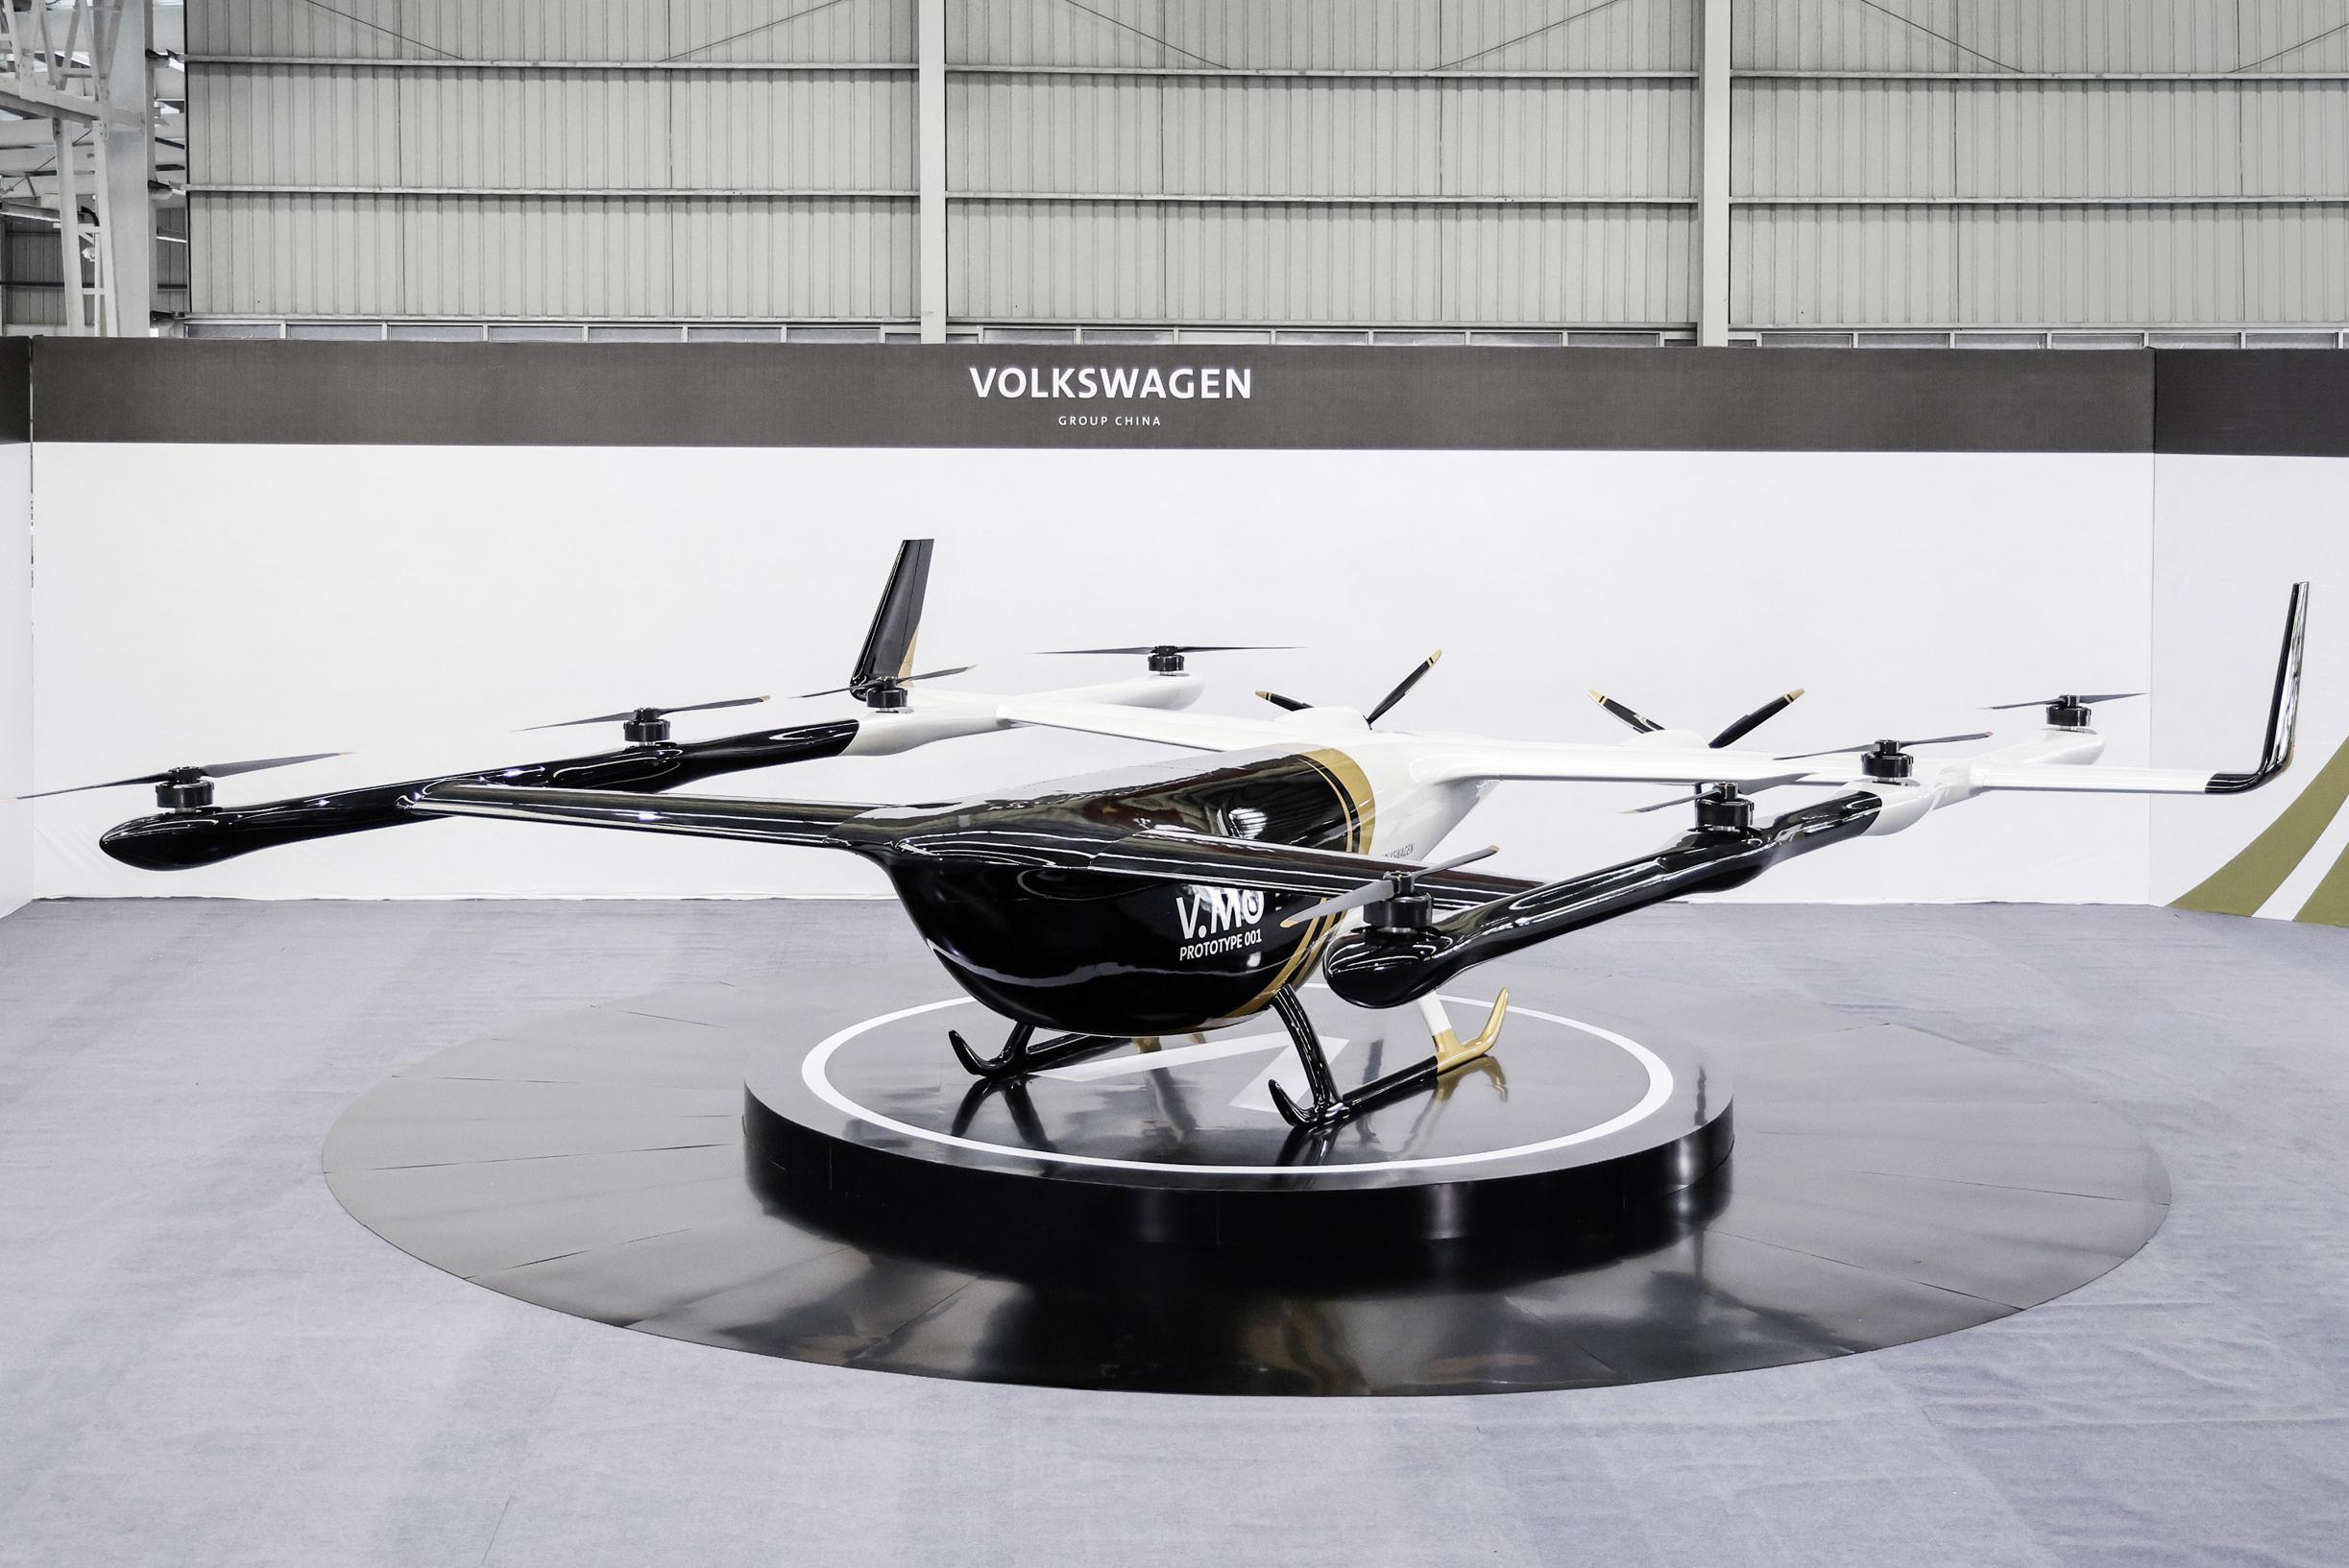 Not a car with wings, but a megadrone: Volkswagen presents striking prototype of ‘flying car’